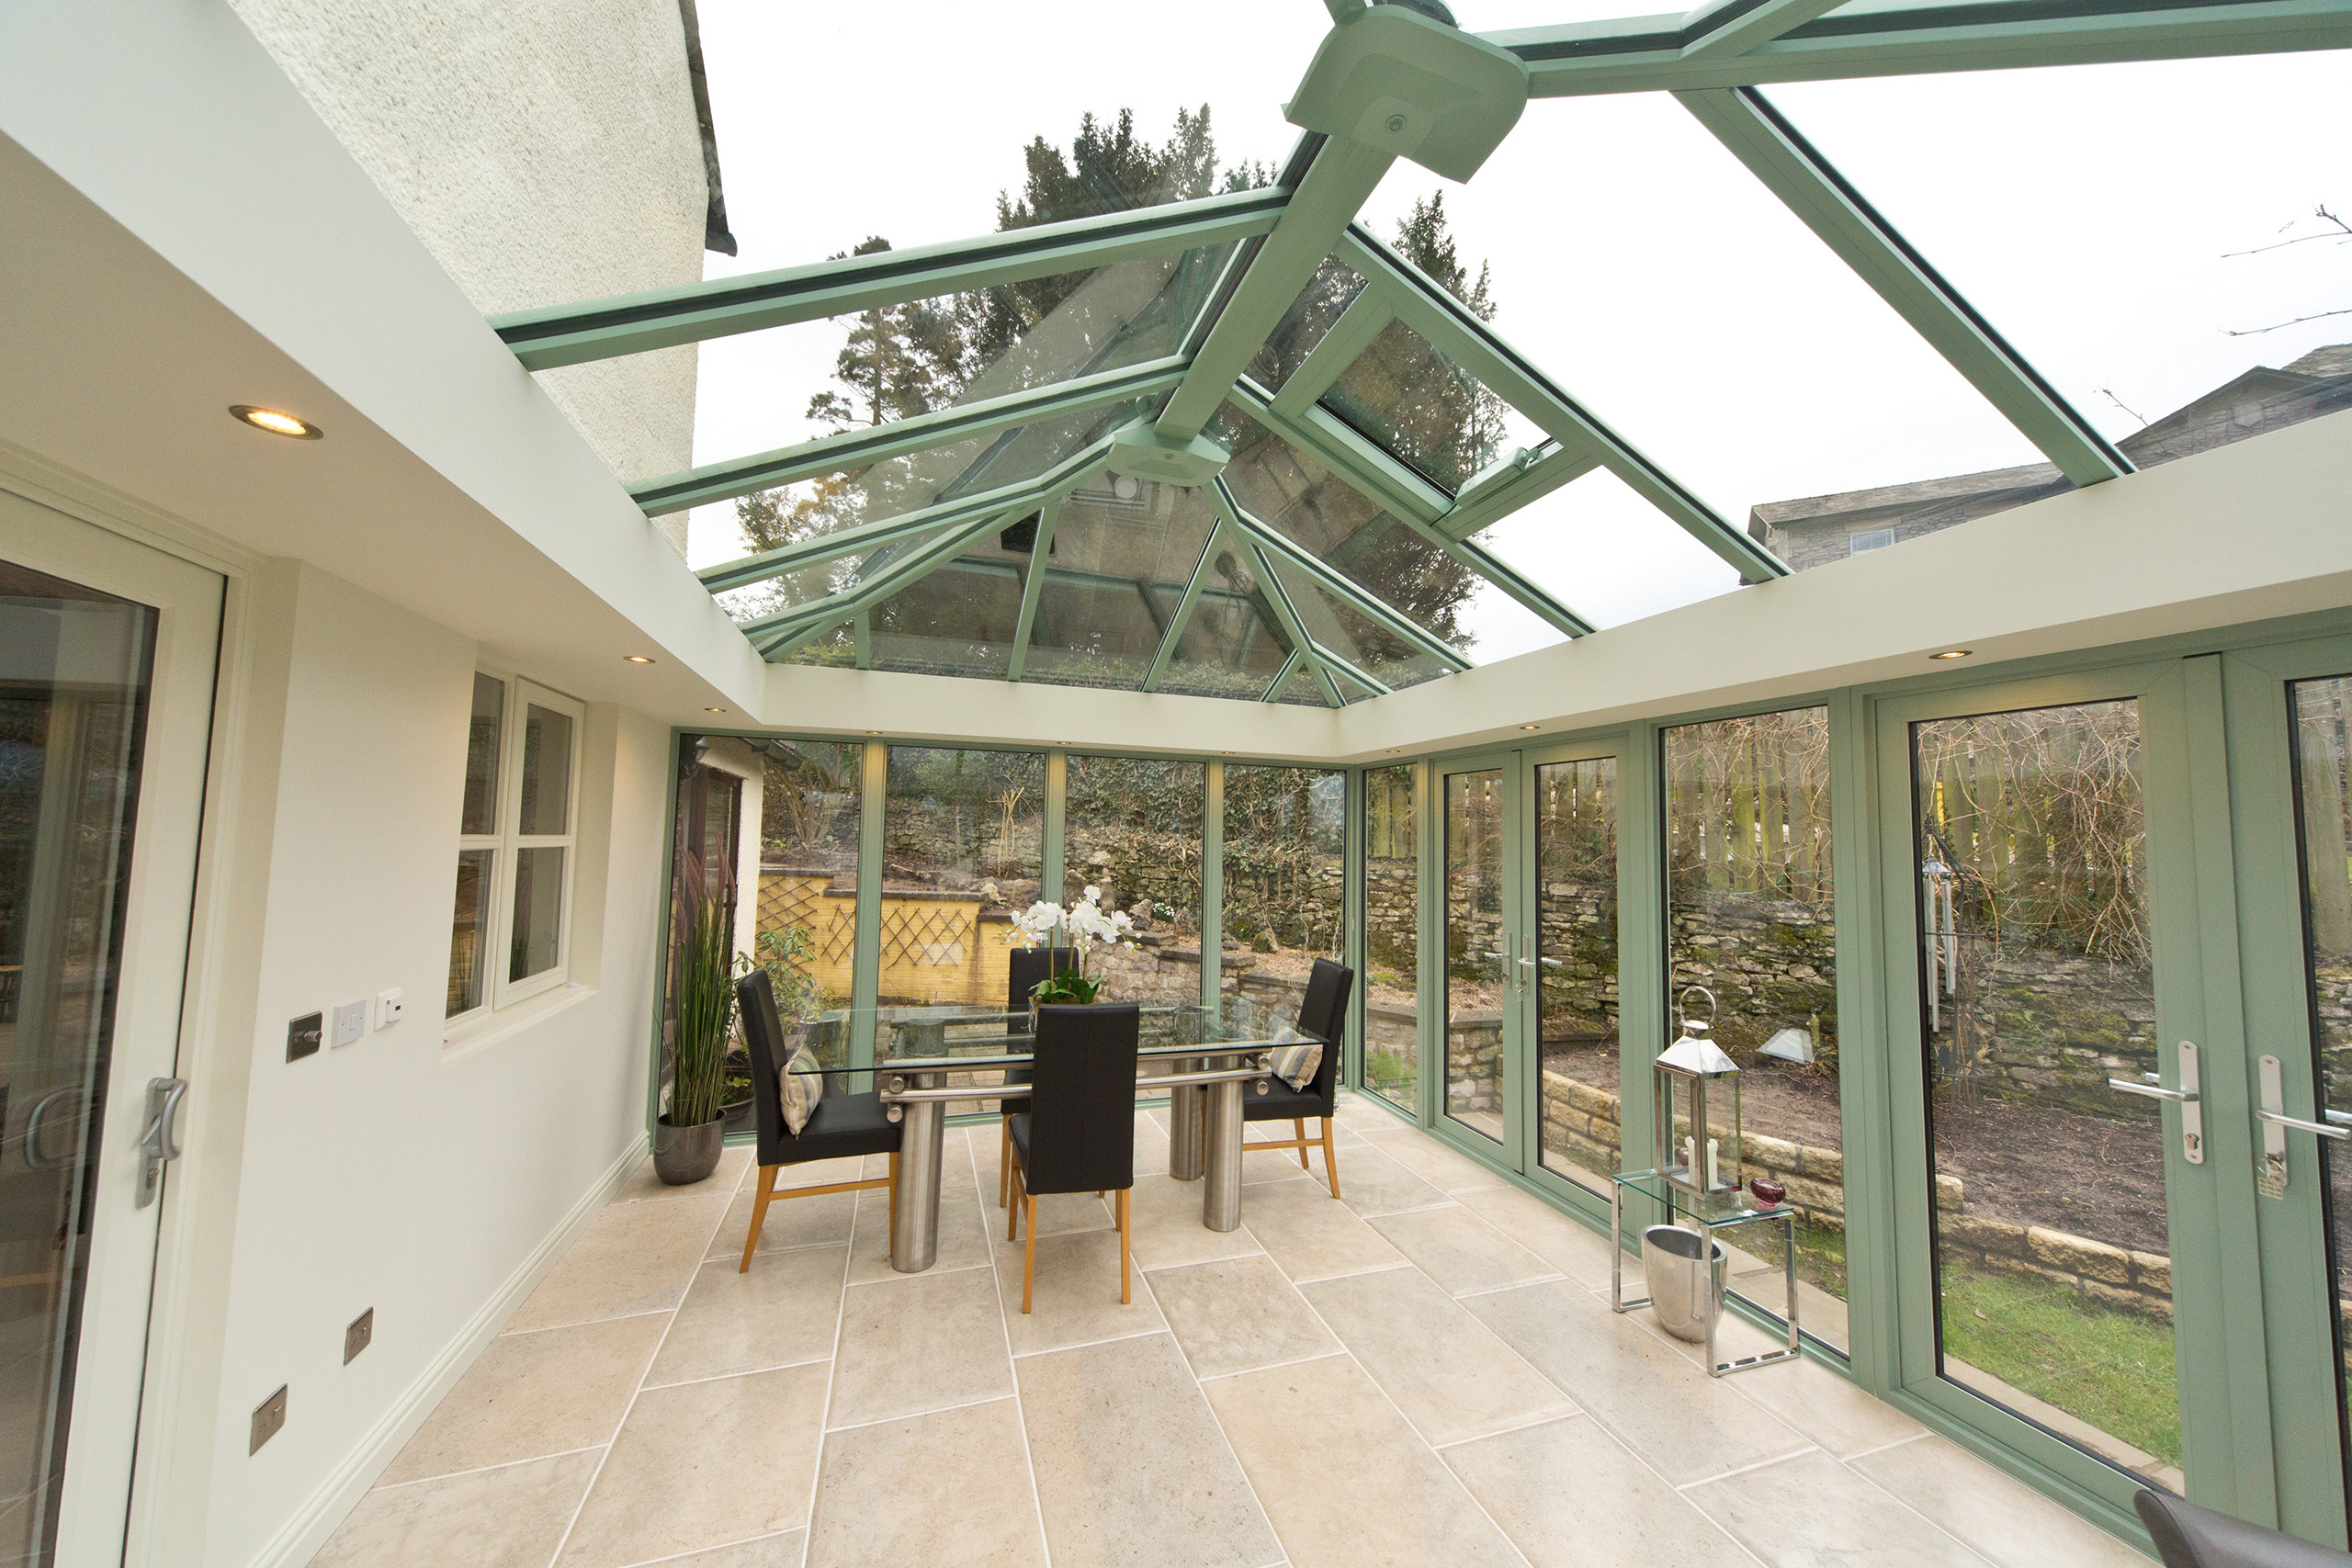 Tips For Converting Your Conservatory Into a Functional Space